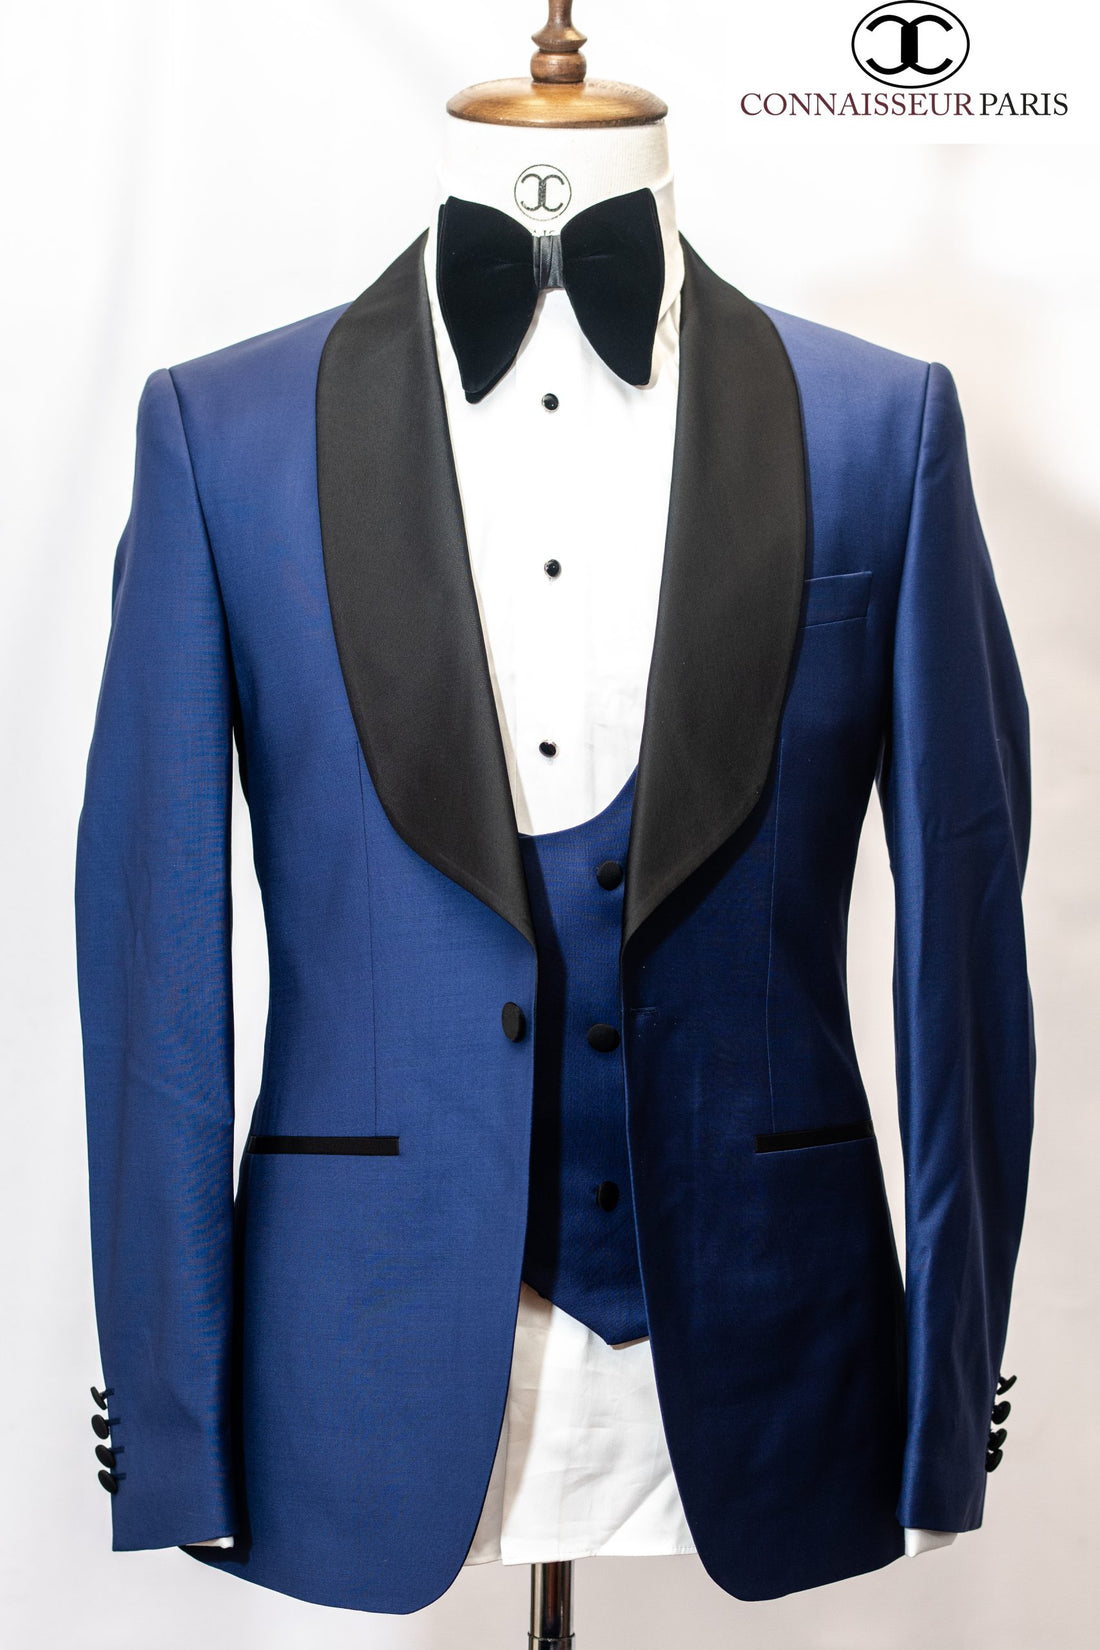 Connaisseur - Mid Blue classic 3-piece slim fit tuxedo with shawl lapel and double breasted U vest